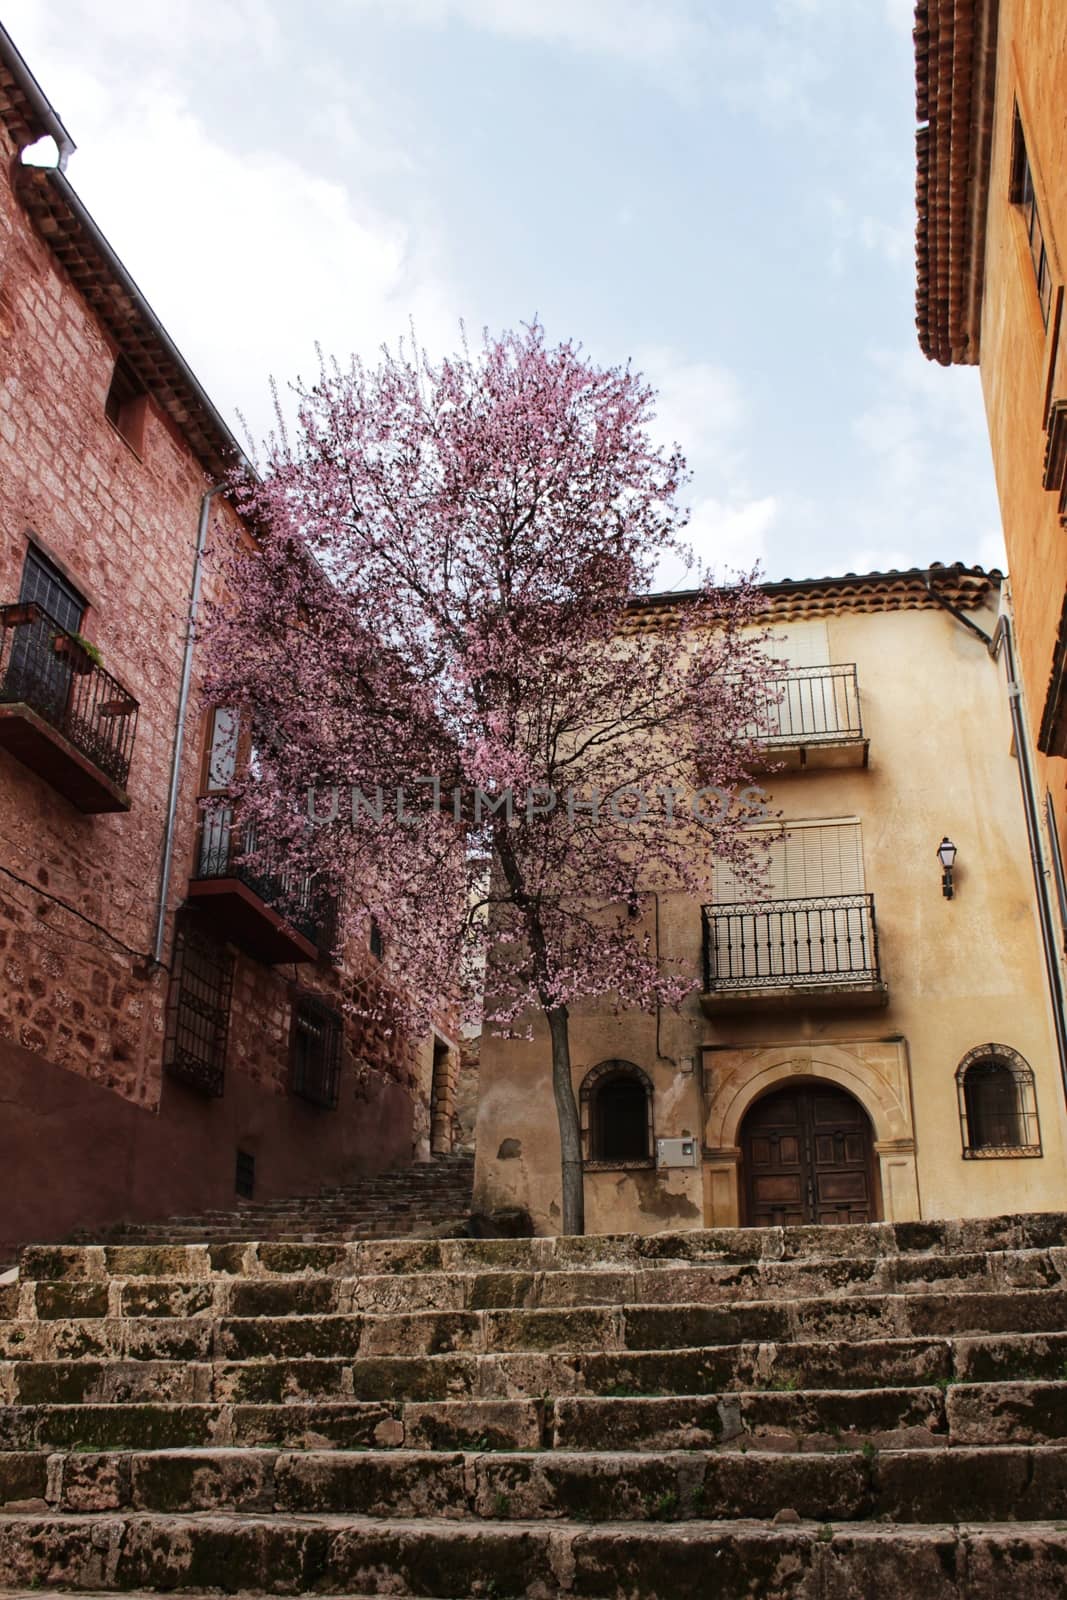 Cherry tree in bloom in a town square in Alcaraz by soniabonet